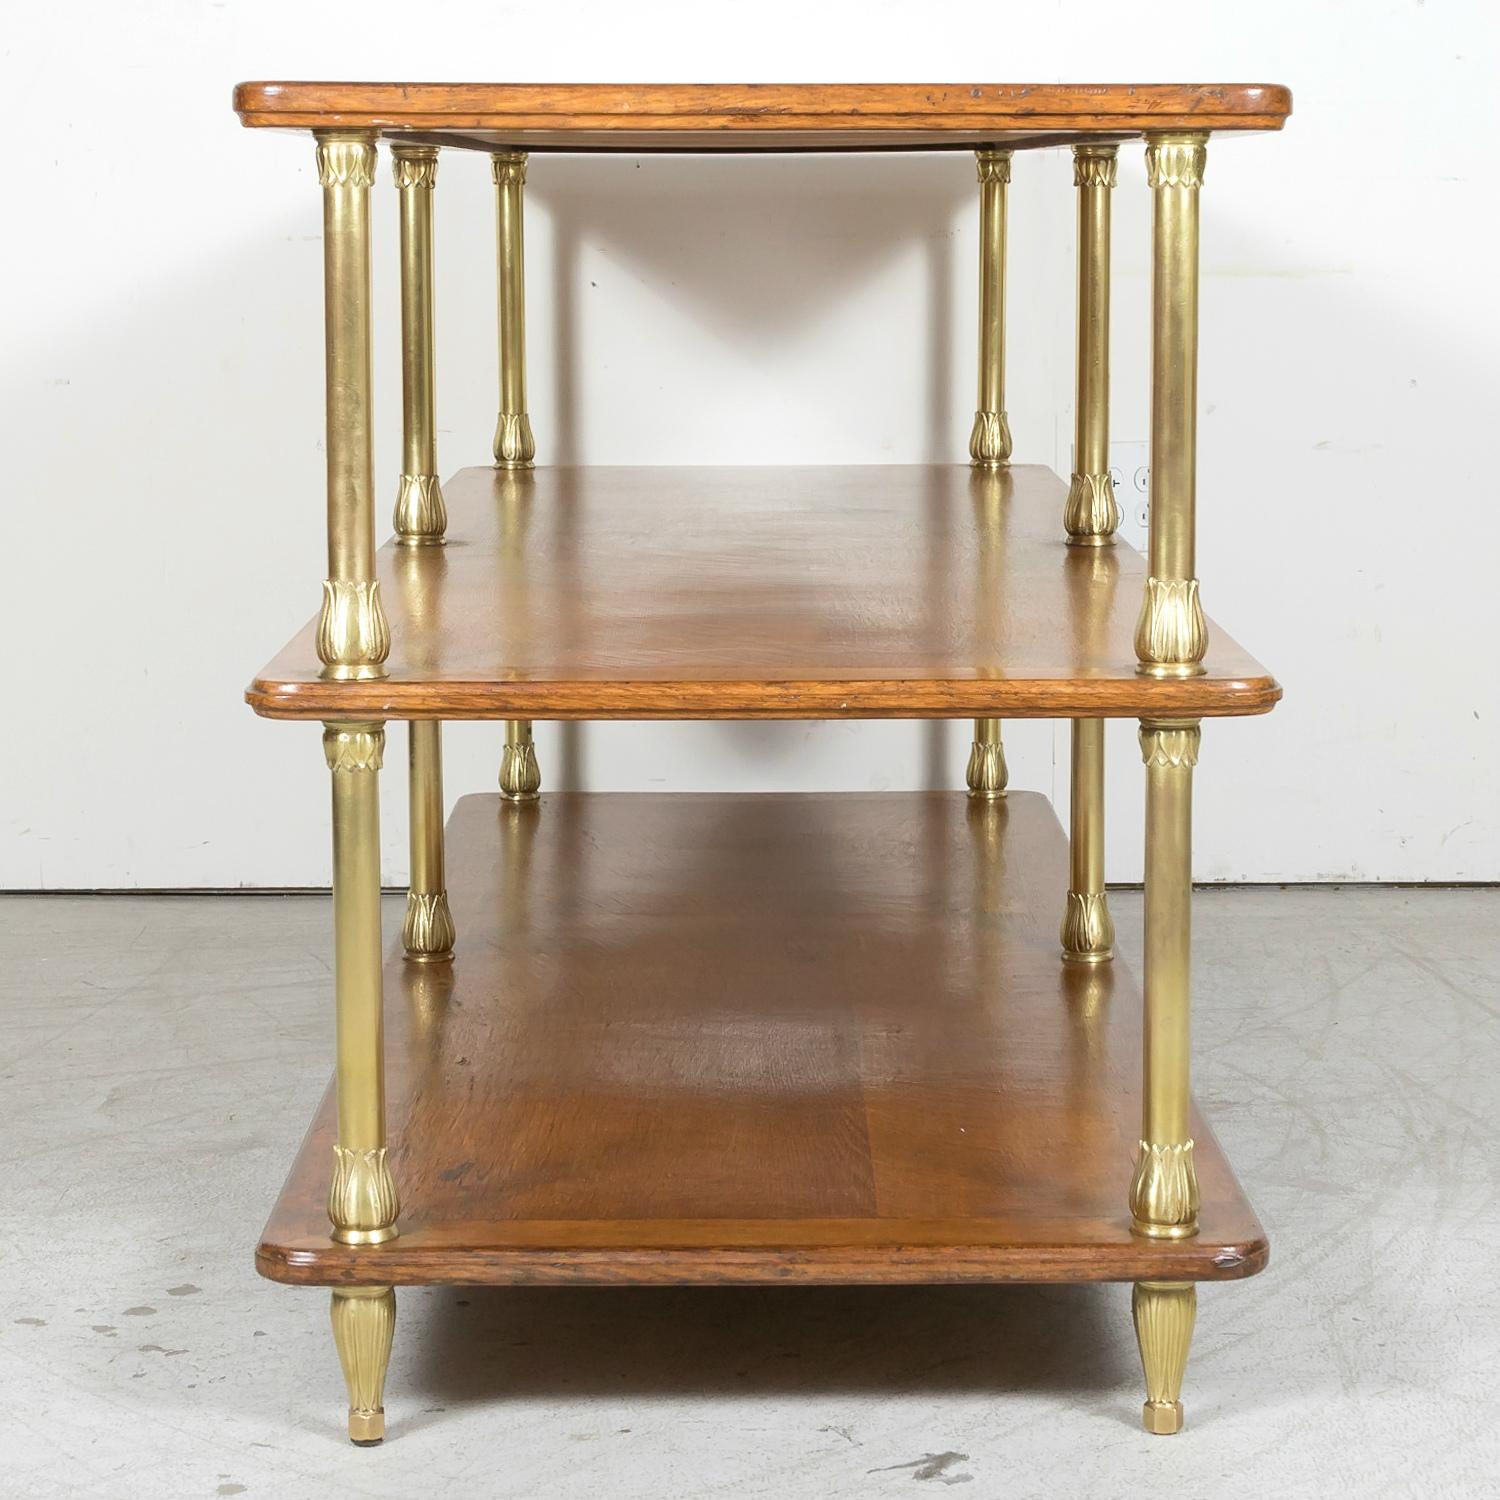 20th Century French Art Deco Period Oak and Brass Display Table / Kitchen Island 14